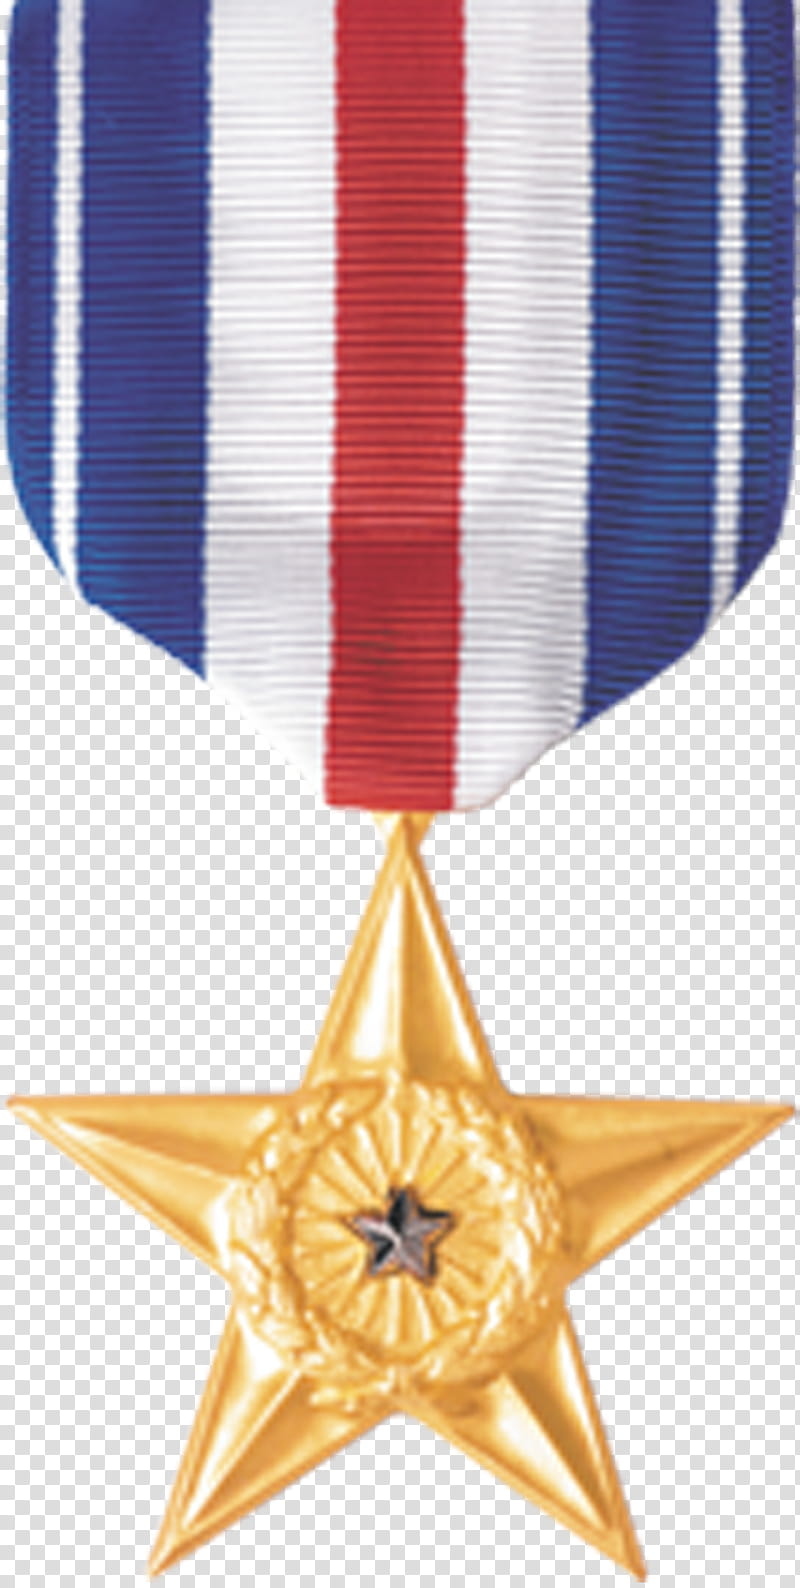 World Heart, Silver Star, World War Ii, Medal Of Honor, Bronze Star Medal, United States Armed Forces, Award, Military transparent background PNG clipart